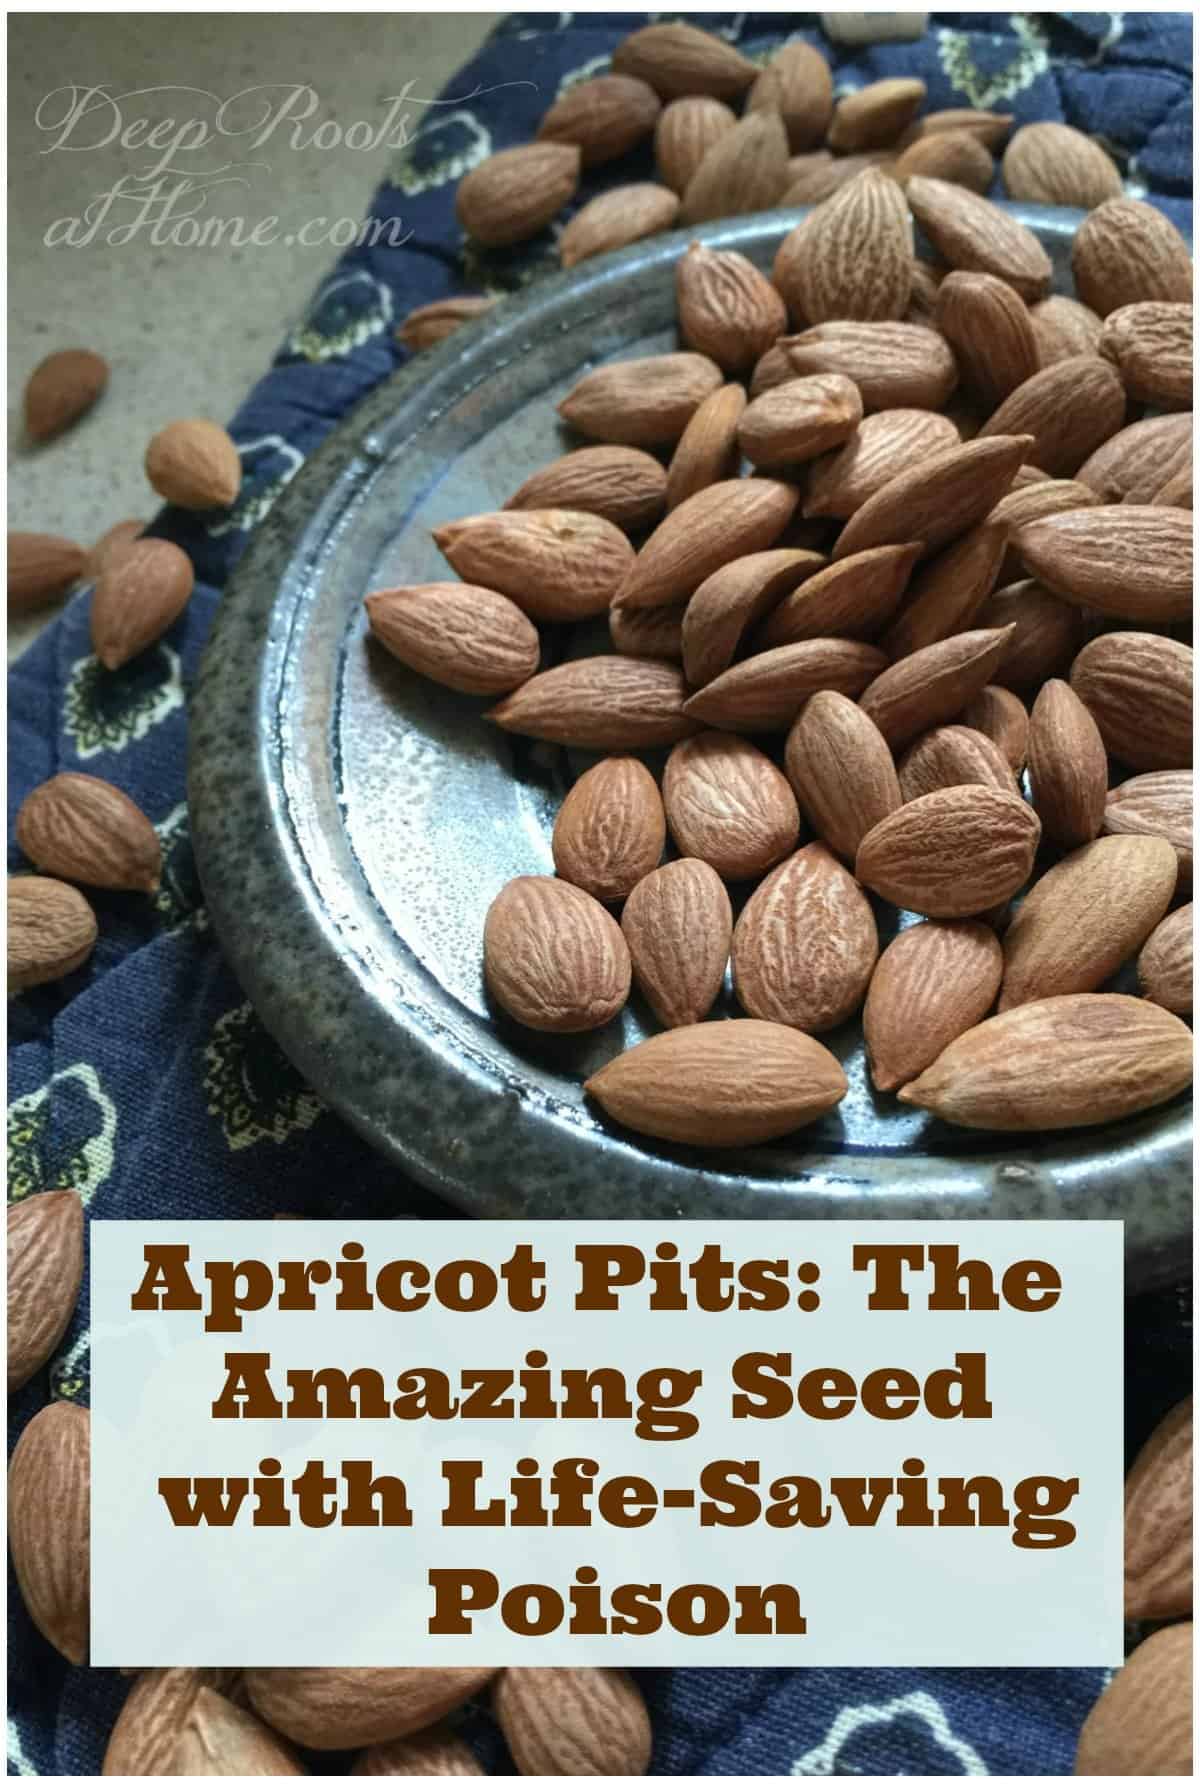 Apricot Pits The Amazing Seed with Life-Saving Poison. seeds or pits